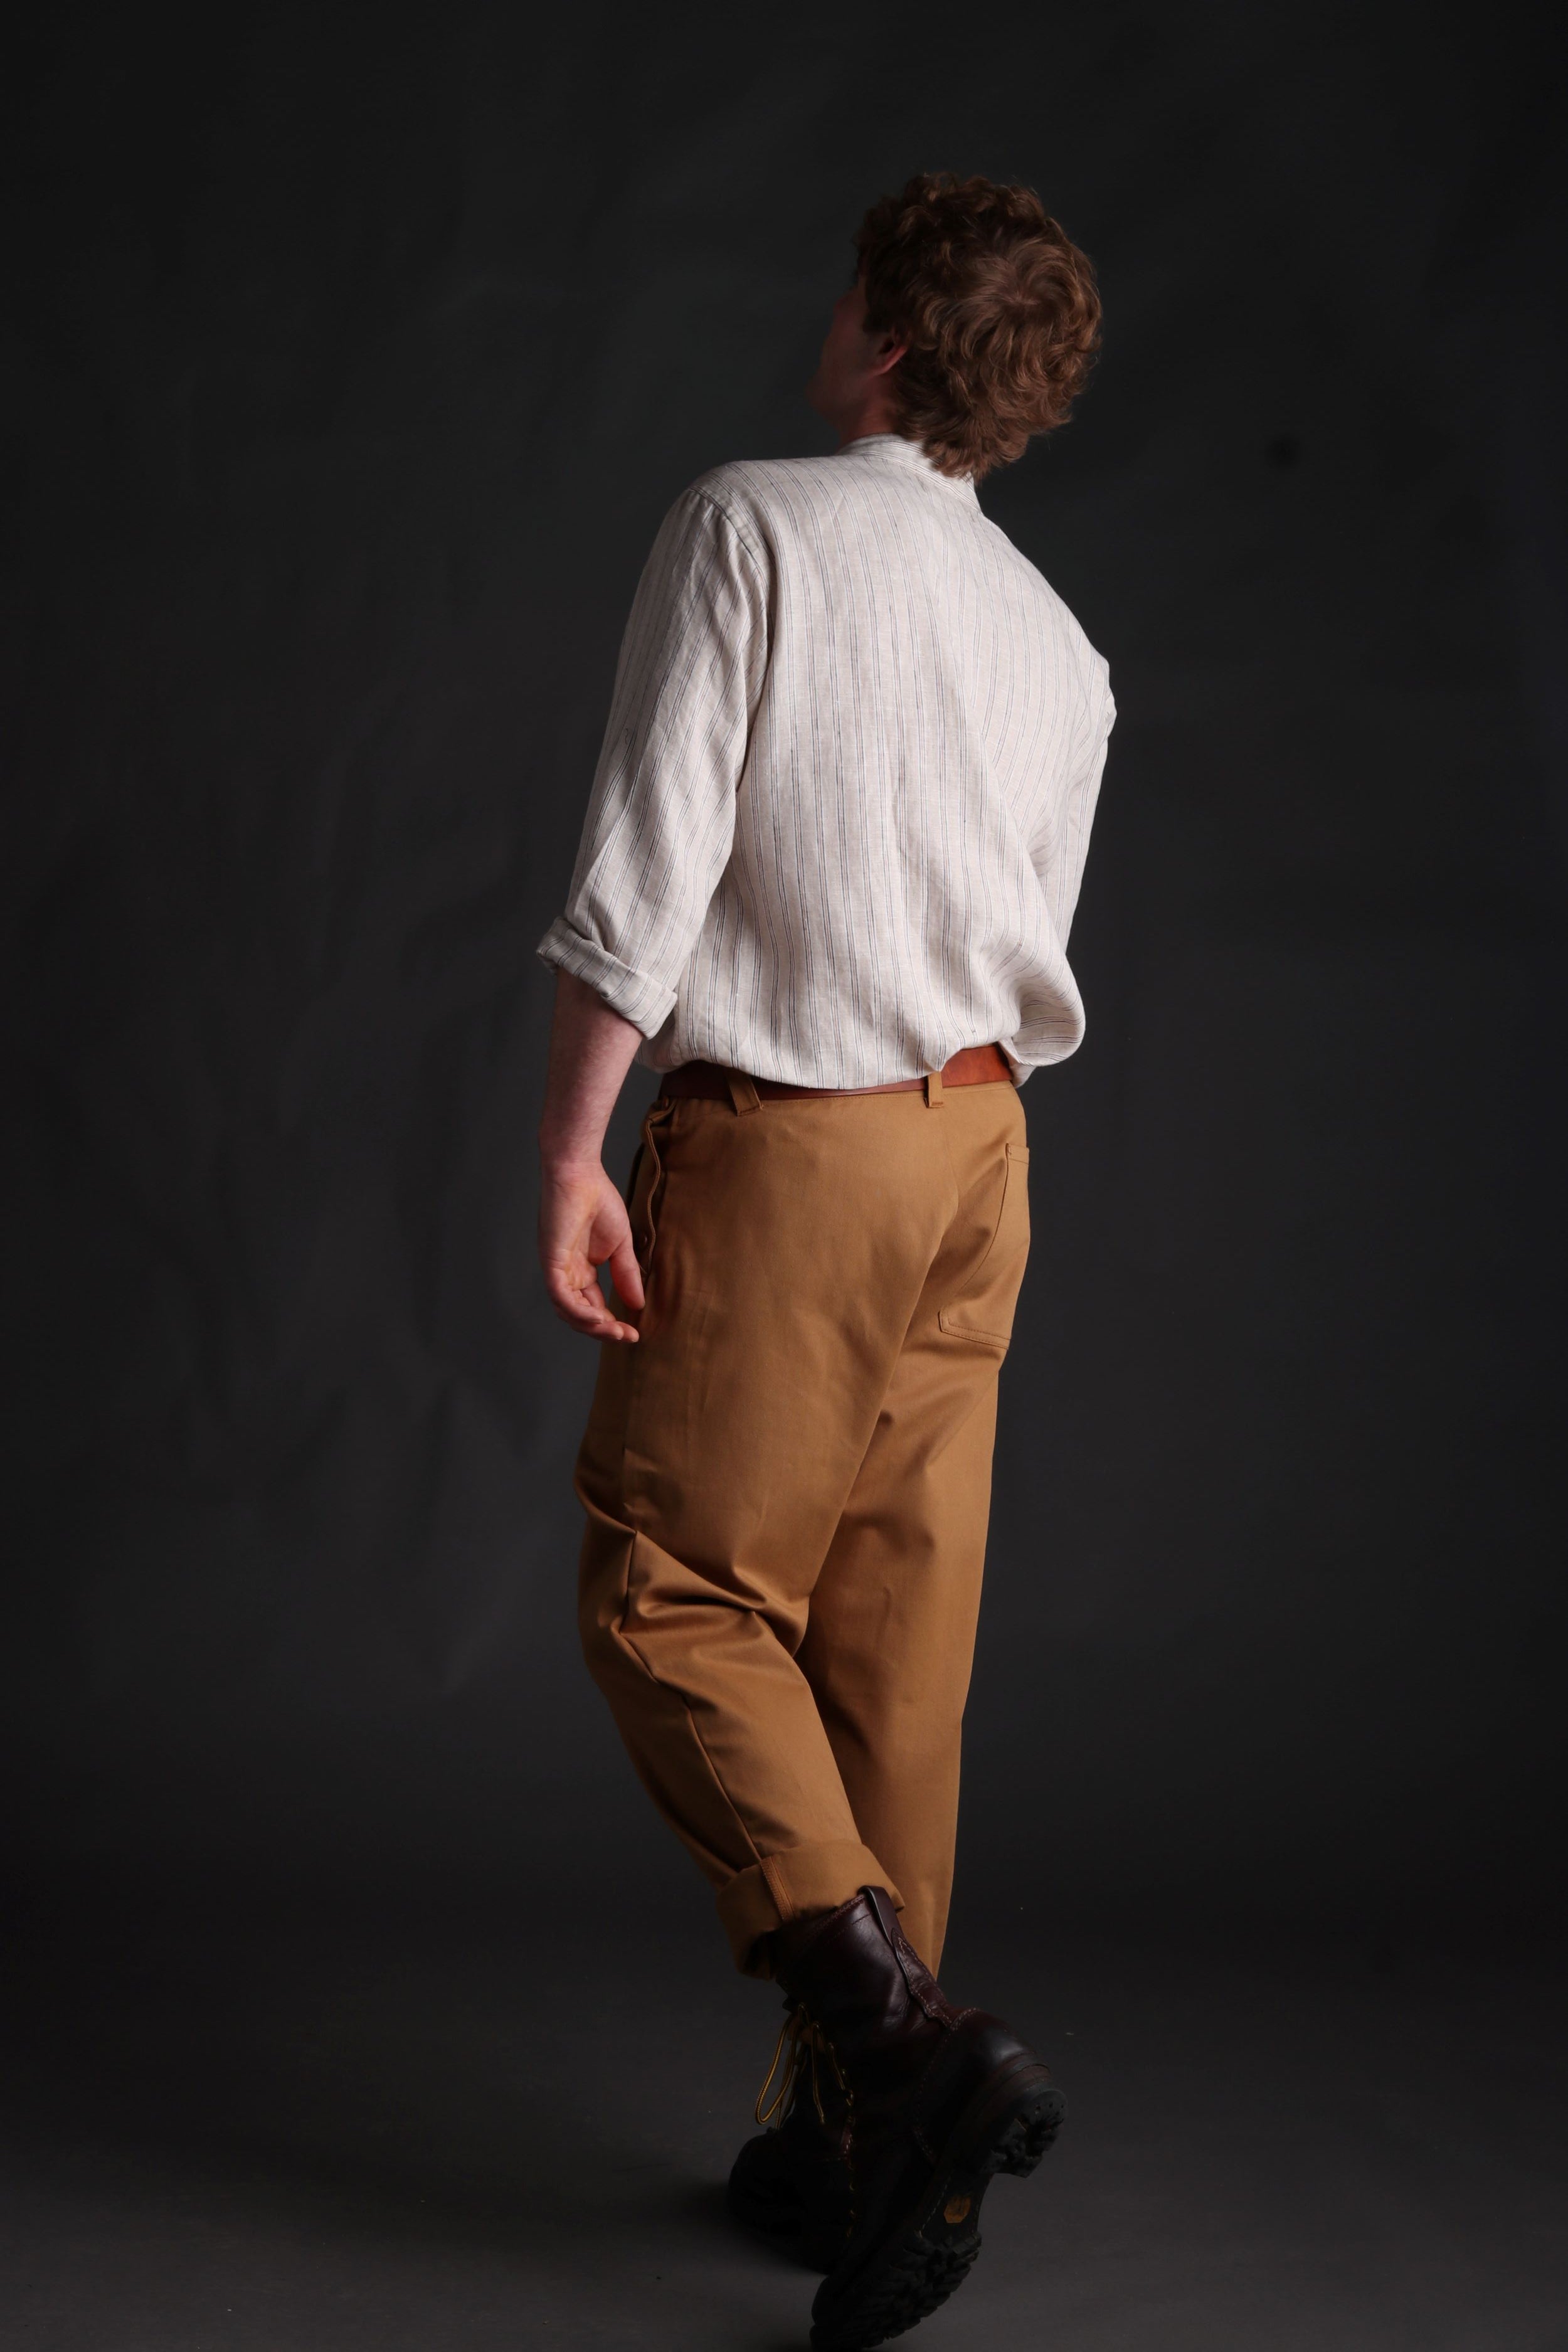 Man wears Carrier Company Collarless Shirt in Natural Linen with Tan Work Trousers